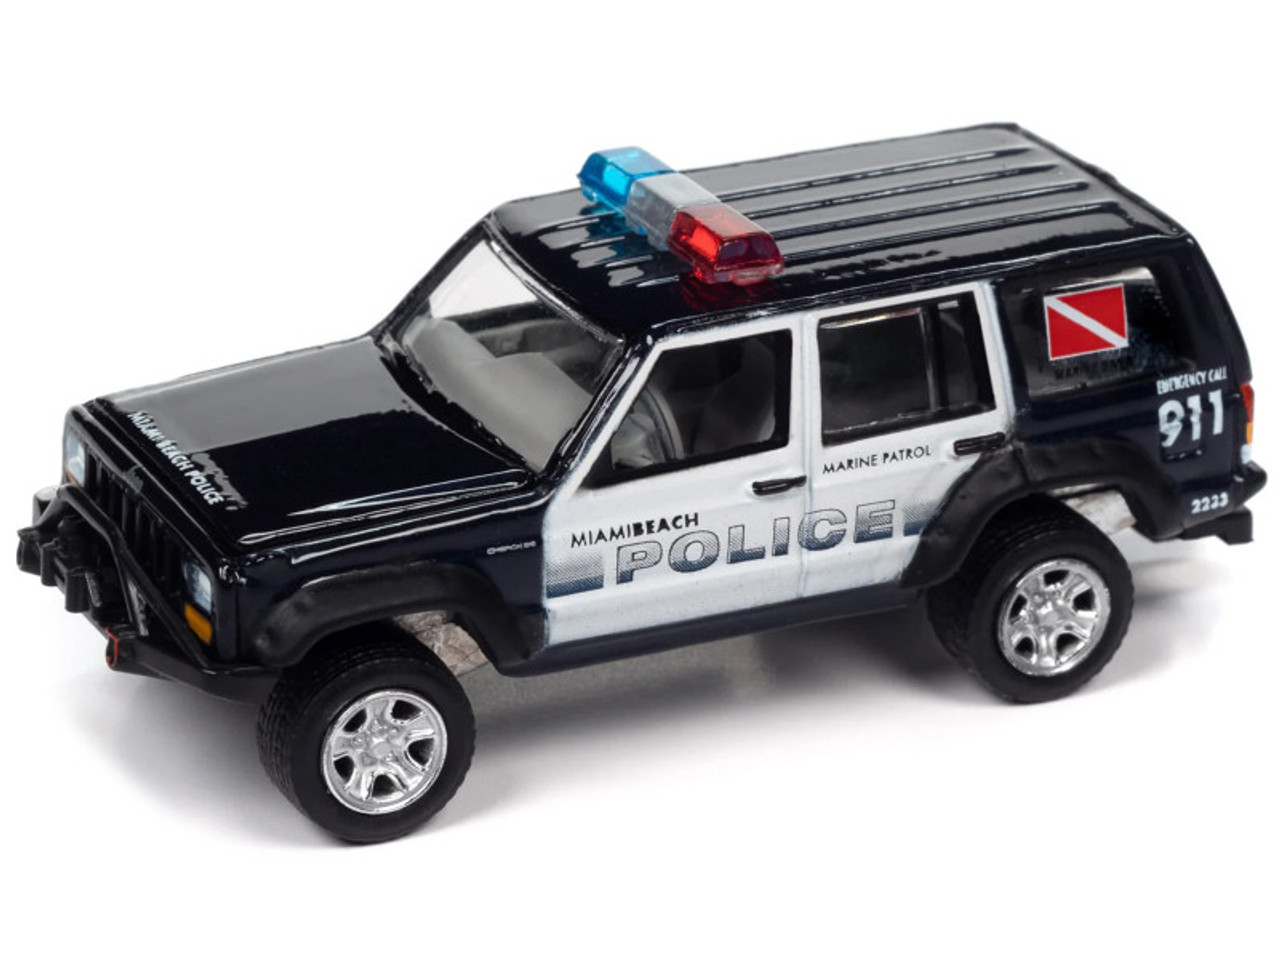 Jeep Cherokee XJ Black and White "Miami Beach Police" with Boat and Trailer "Tow & Go" Series Limited Edition to 3504 pieces Worldwide 1/64 Diecast Model Car by Johnny Lightning